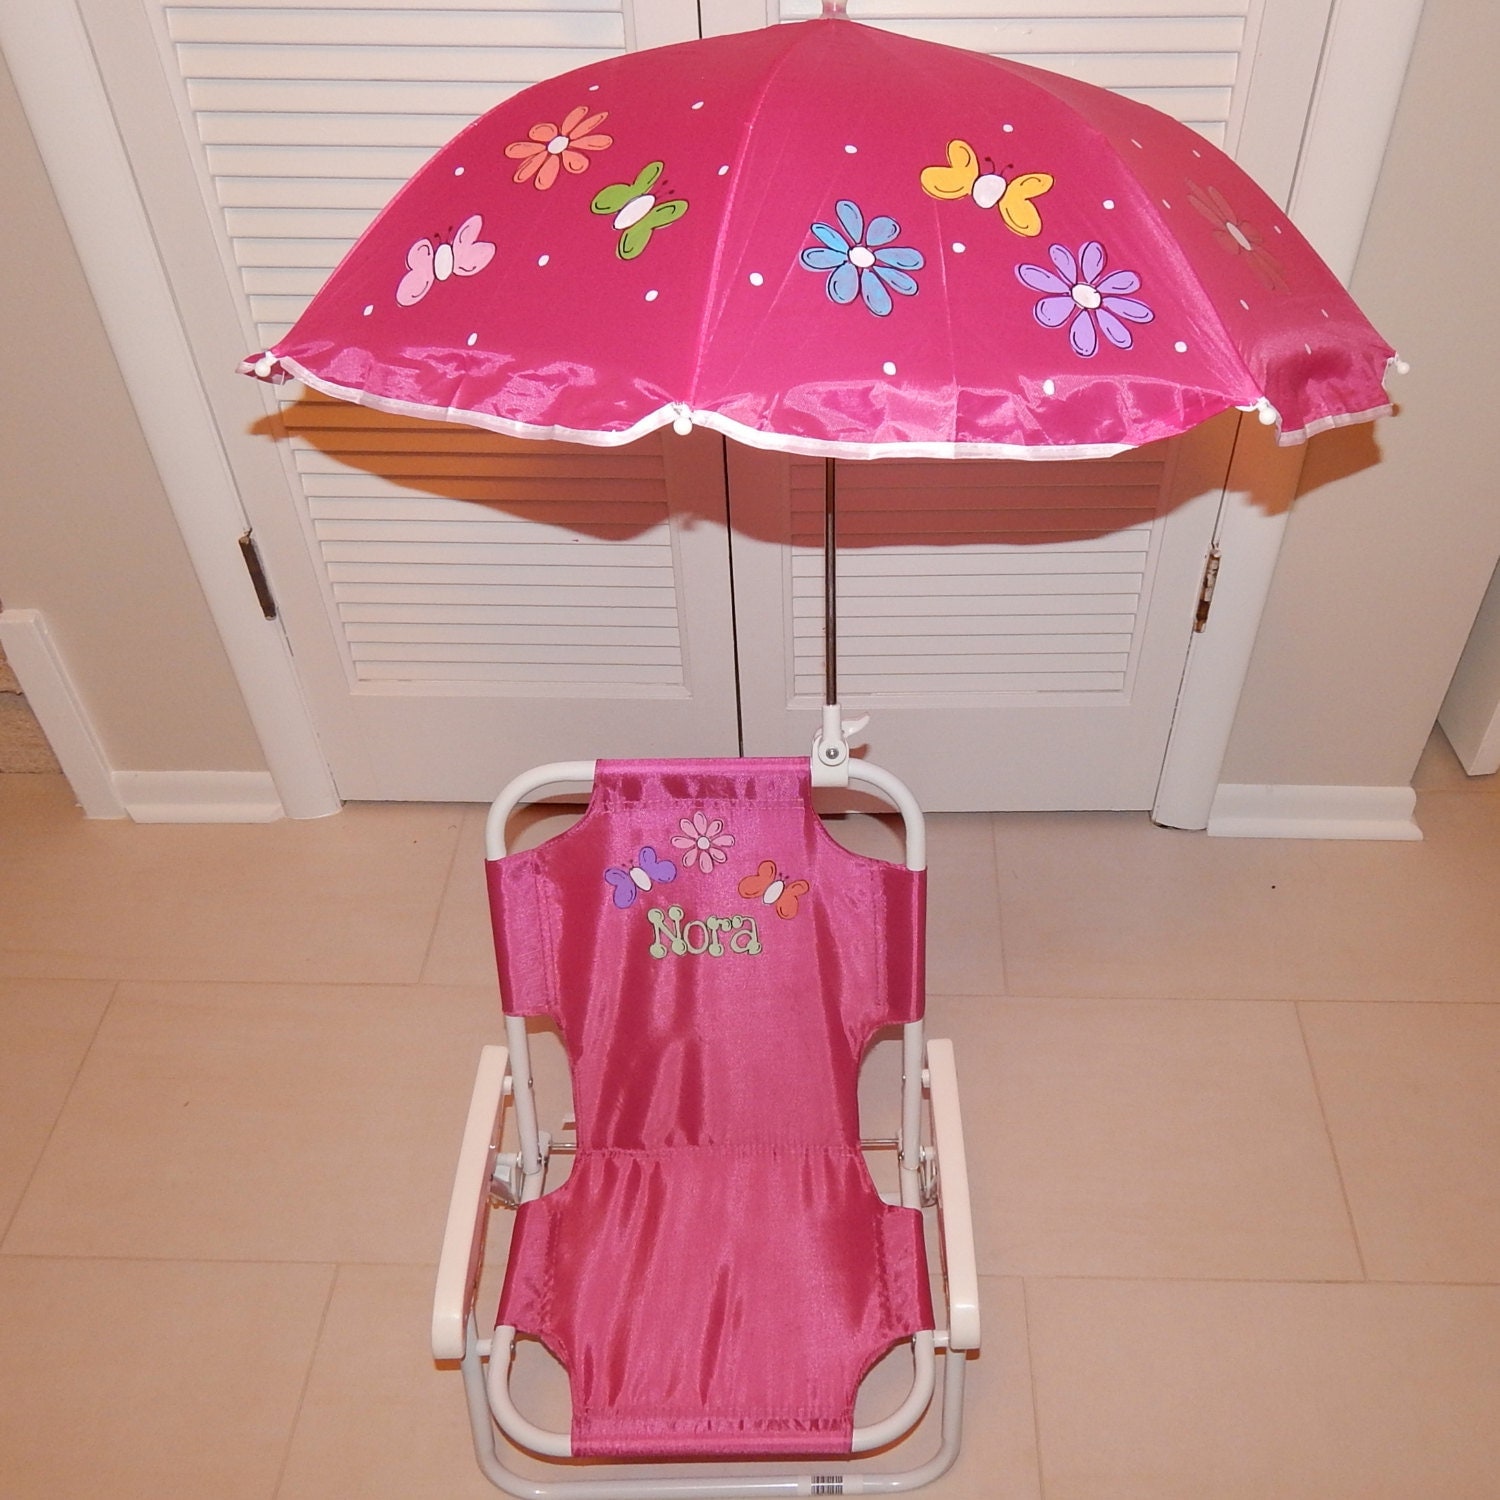  Personalized Kids Beach Chair With Umbrella for Simple Design